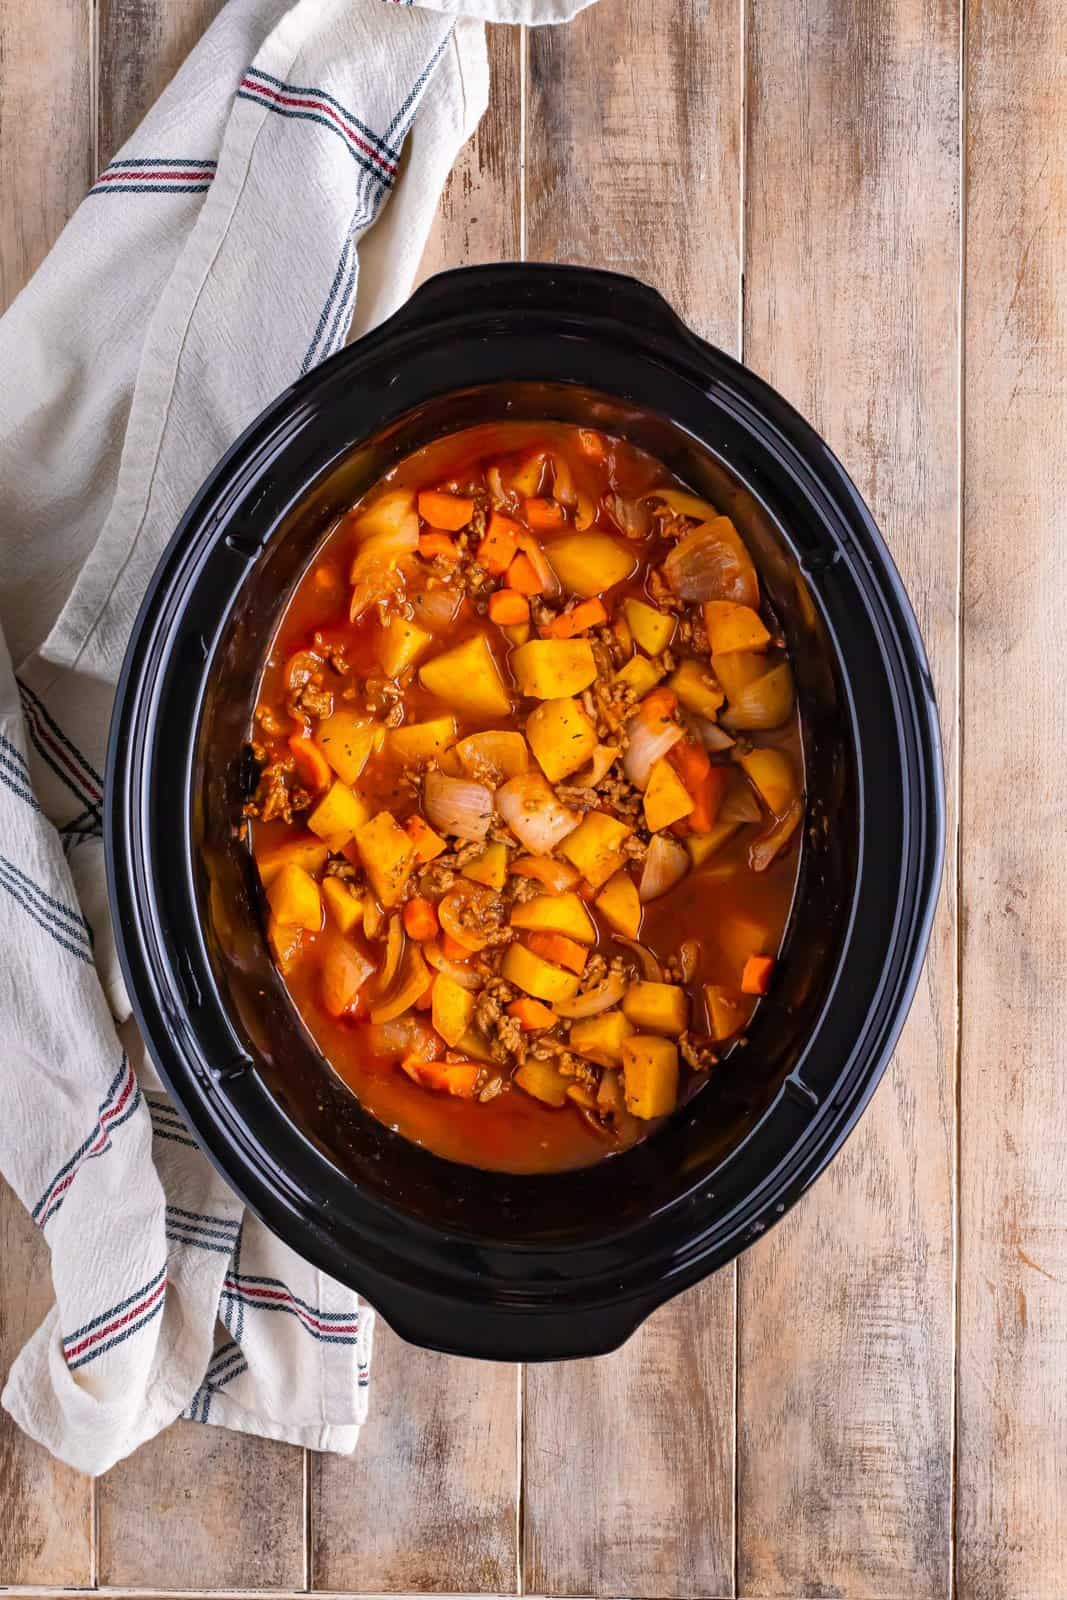 A slow cooker full of delicious cowboy stew.